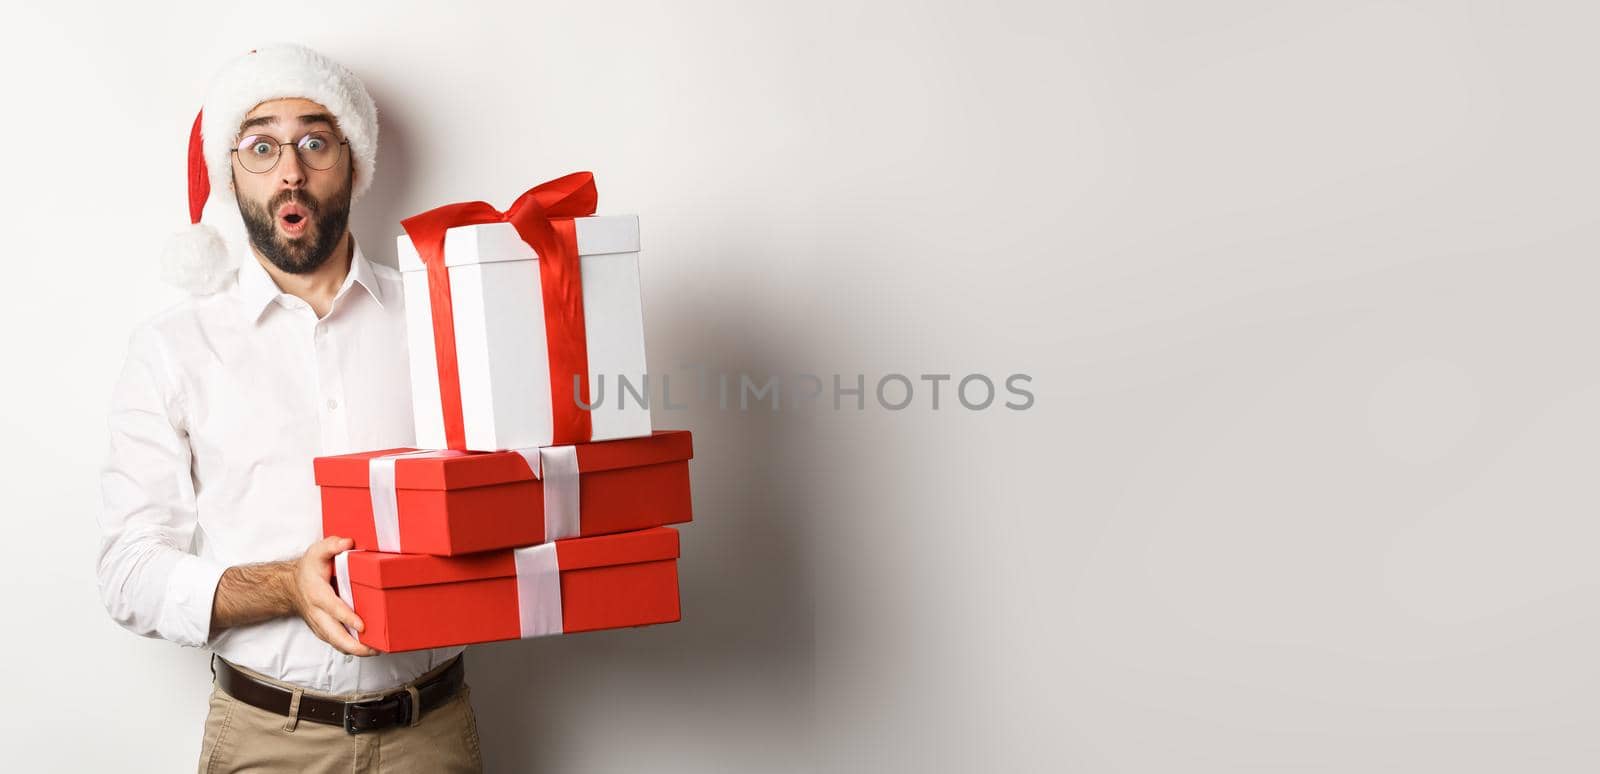 Winter holidays and celebration. Excited man holding Christmas gifts and looking surprised, wearing Santa hat, standing over white background.